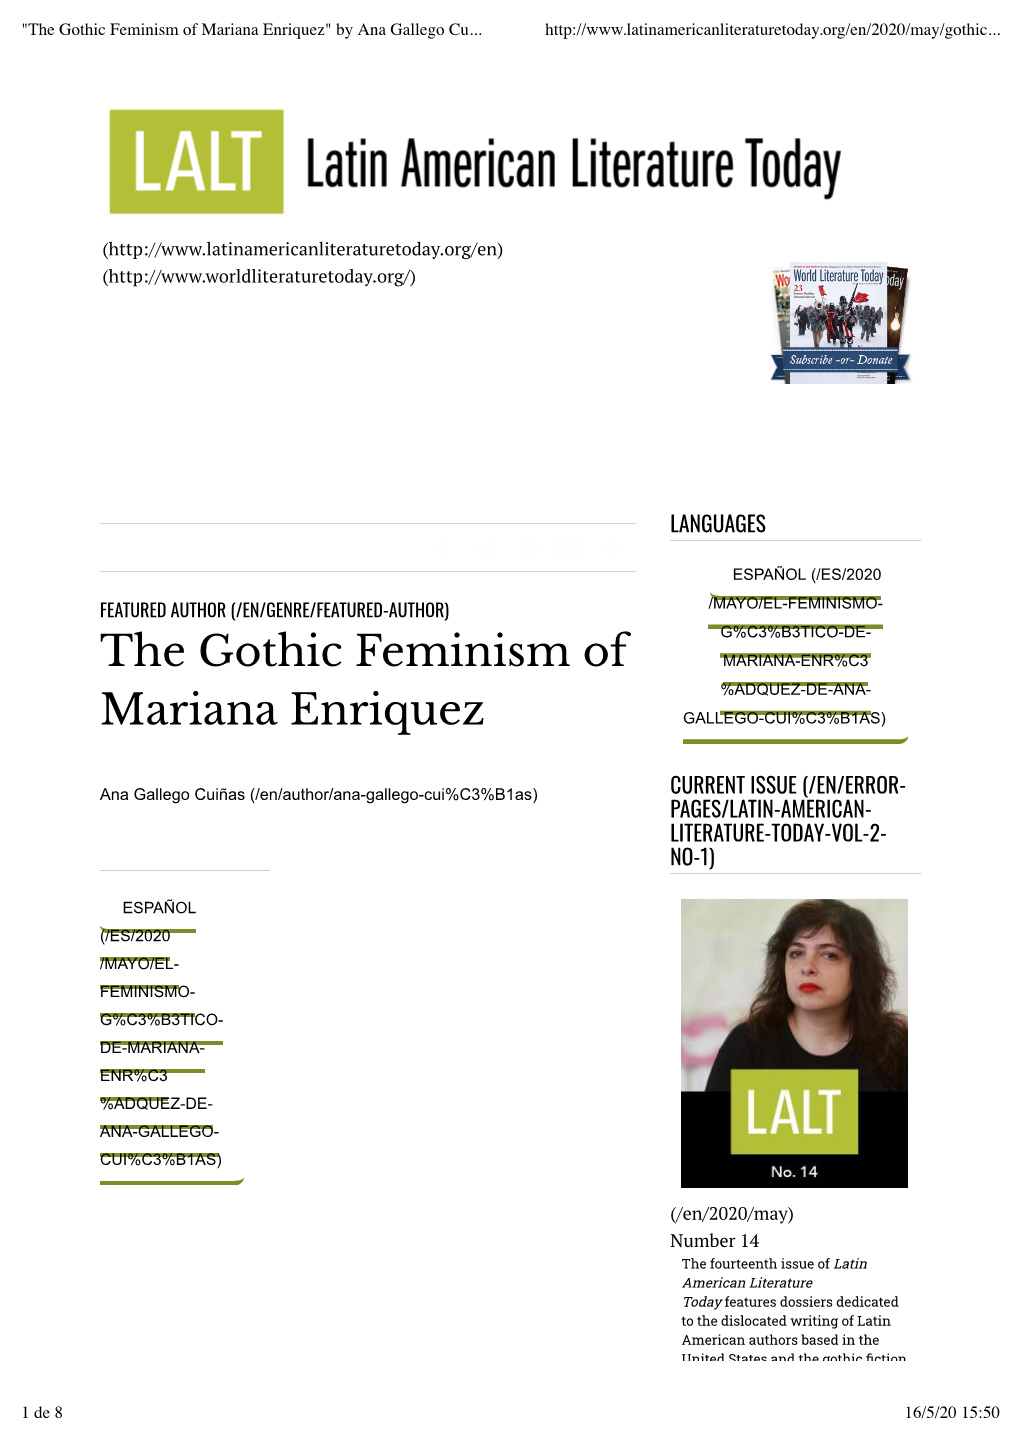 "The Gothic Feminism of Mariana Enriquez" by Ana Gallego Cuiñas